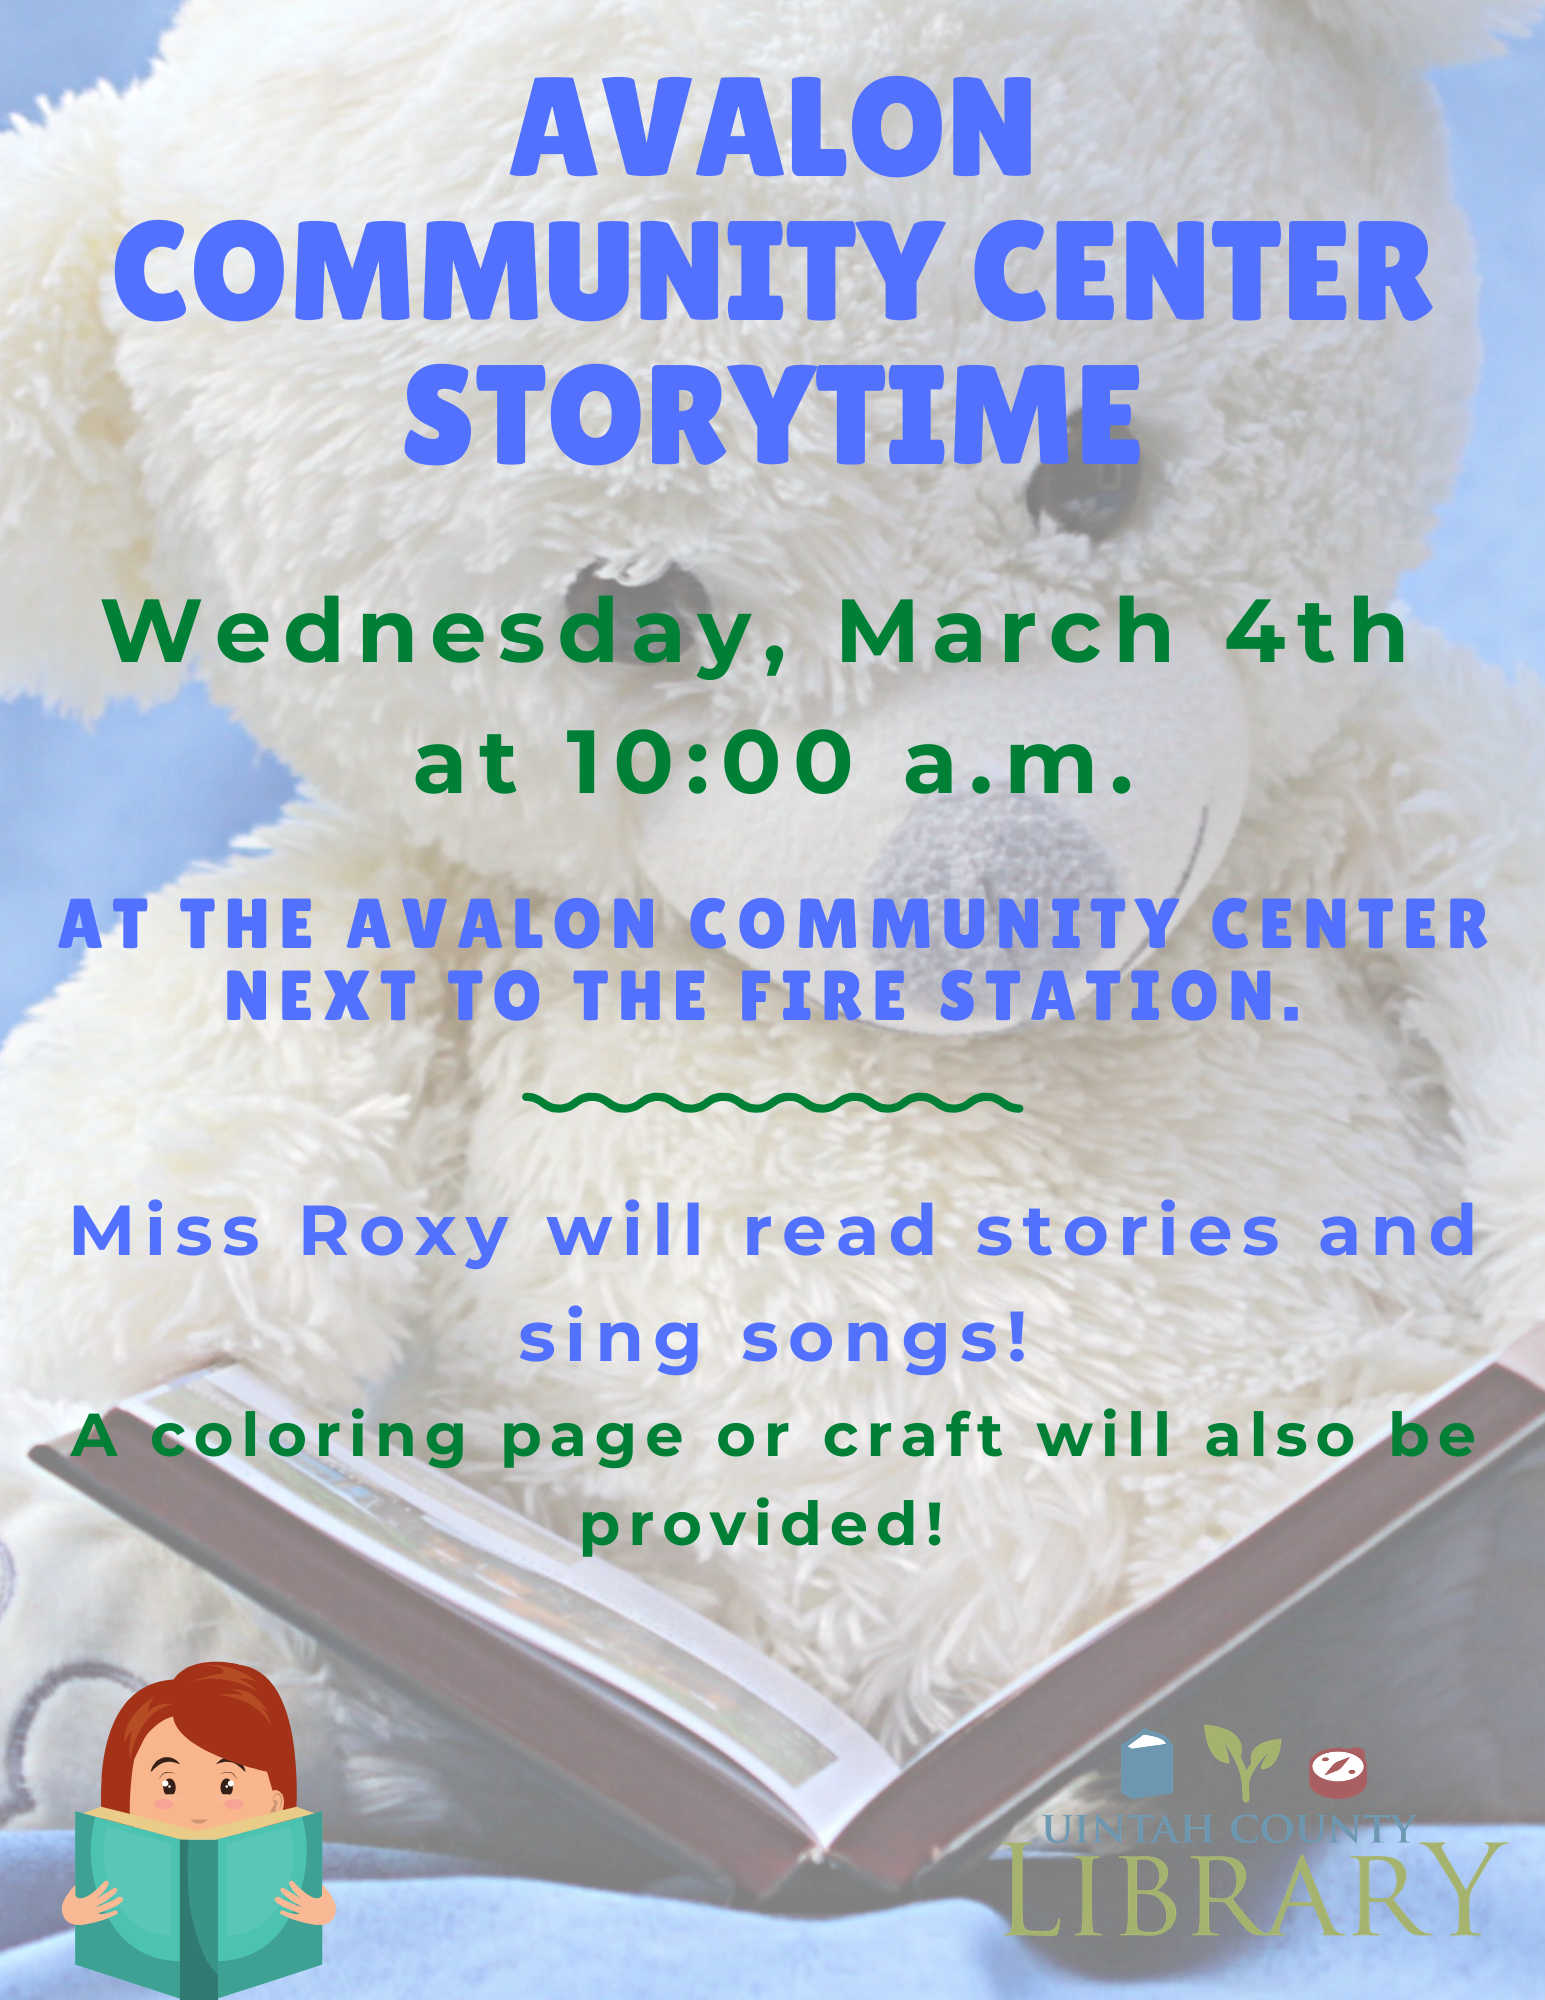 Avalon Community Center Storytime  Wednesday, March 4th at 10:00 a.m.   at the Avalon Community Center next to the fire station   Miss Roxy will read stories and sing songs! A coloring page or craft will also be provided! 